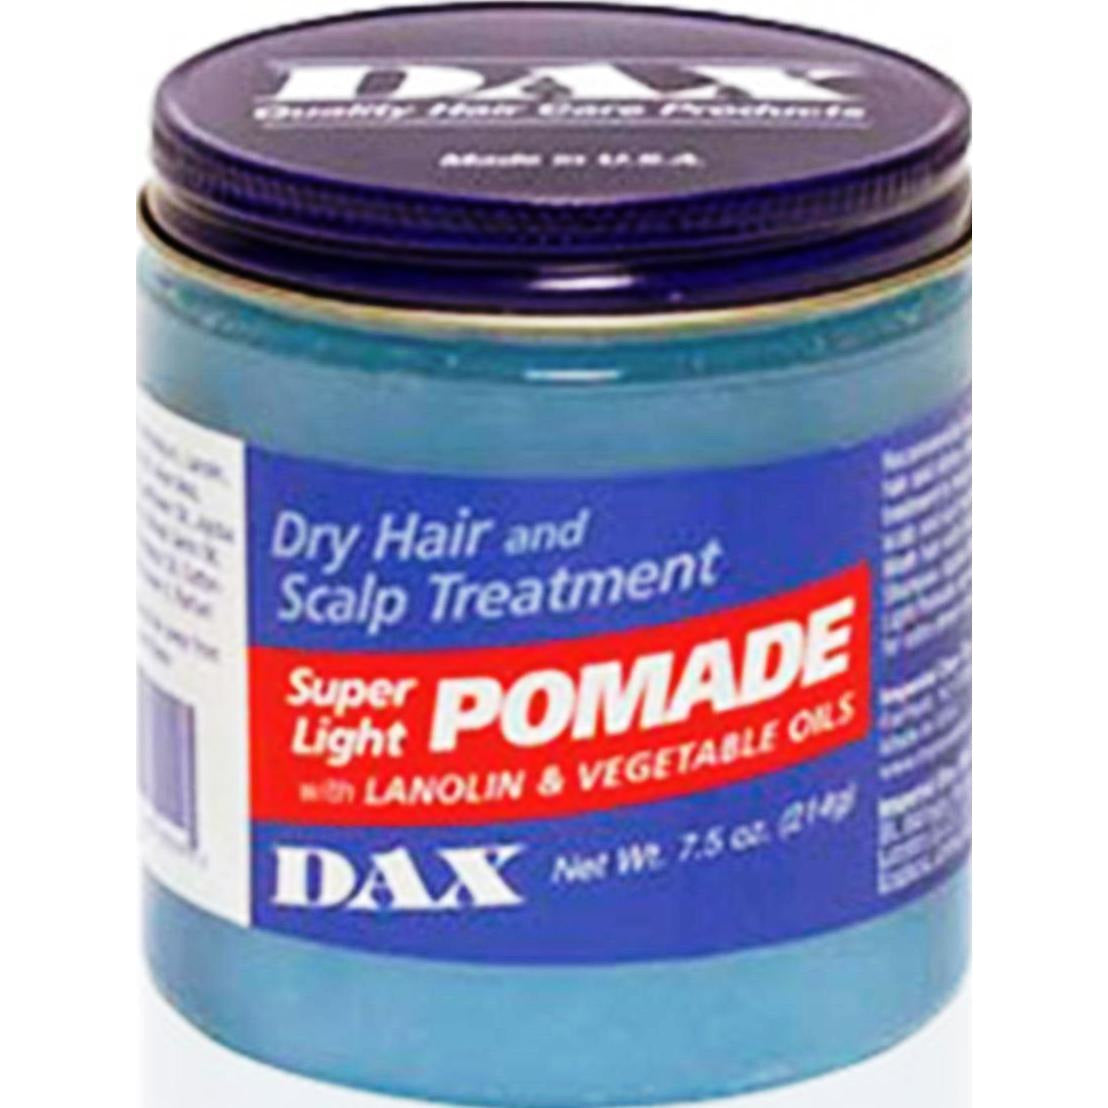 DAX Lanolin Pomade - Afro Cosmetic Shop